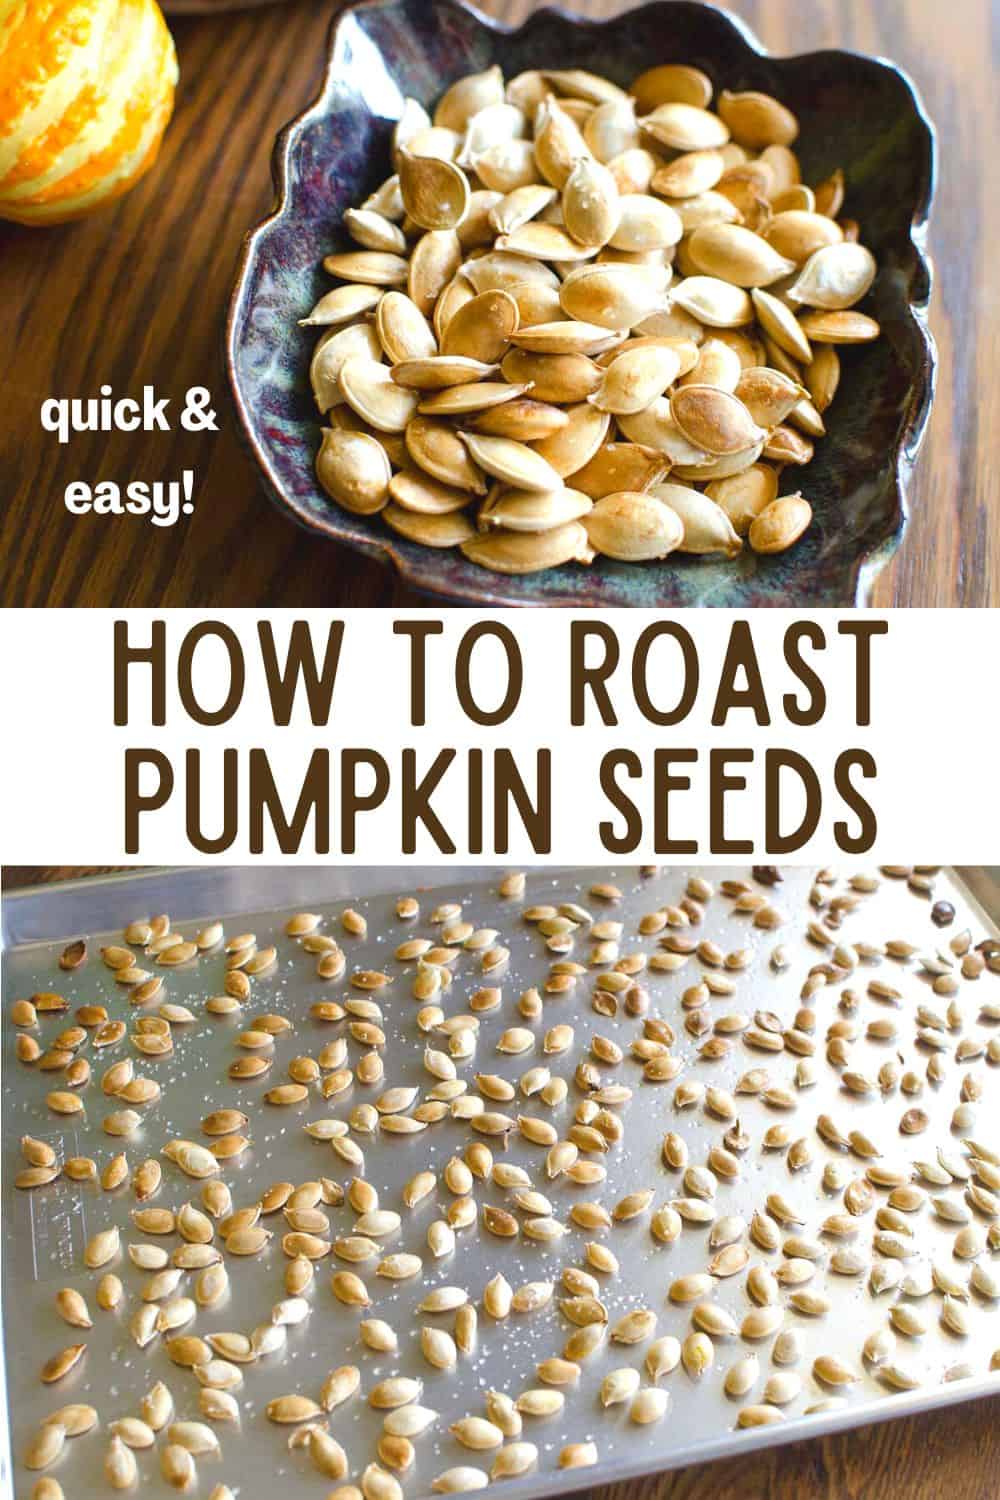 Learn how to roast pumpkin seeds. Save your pumpkin seeds and roast them in the oven for a healthy crunchy snack your family will love!